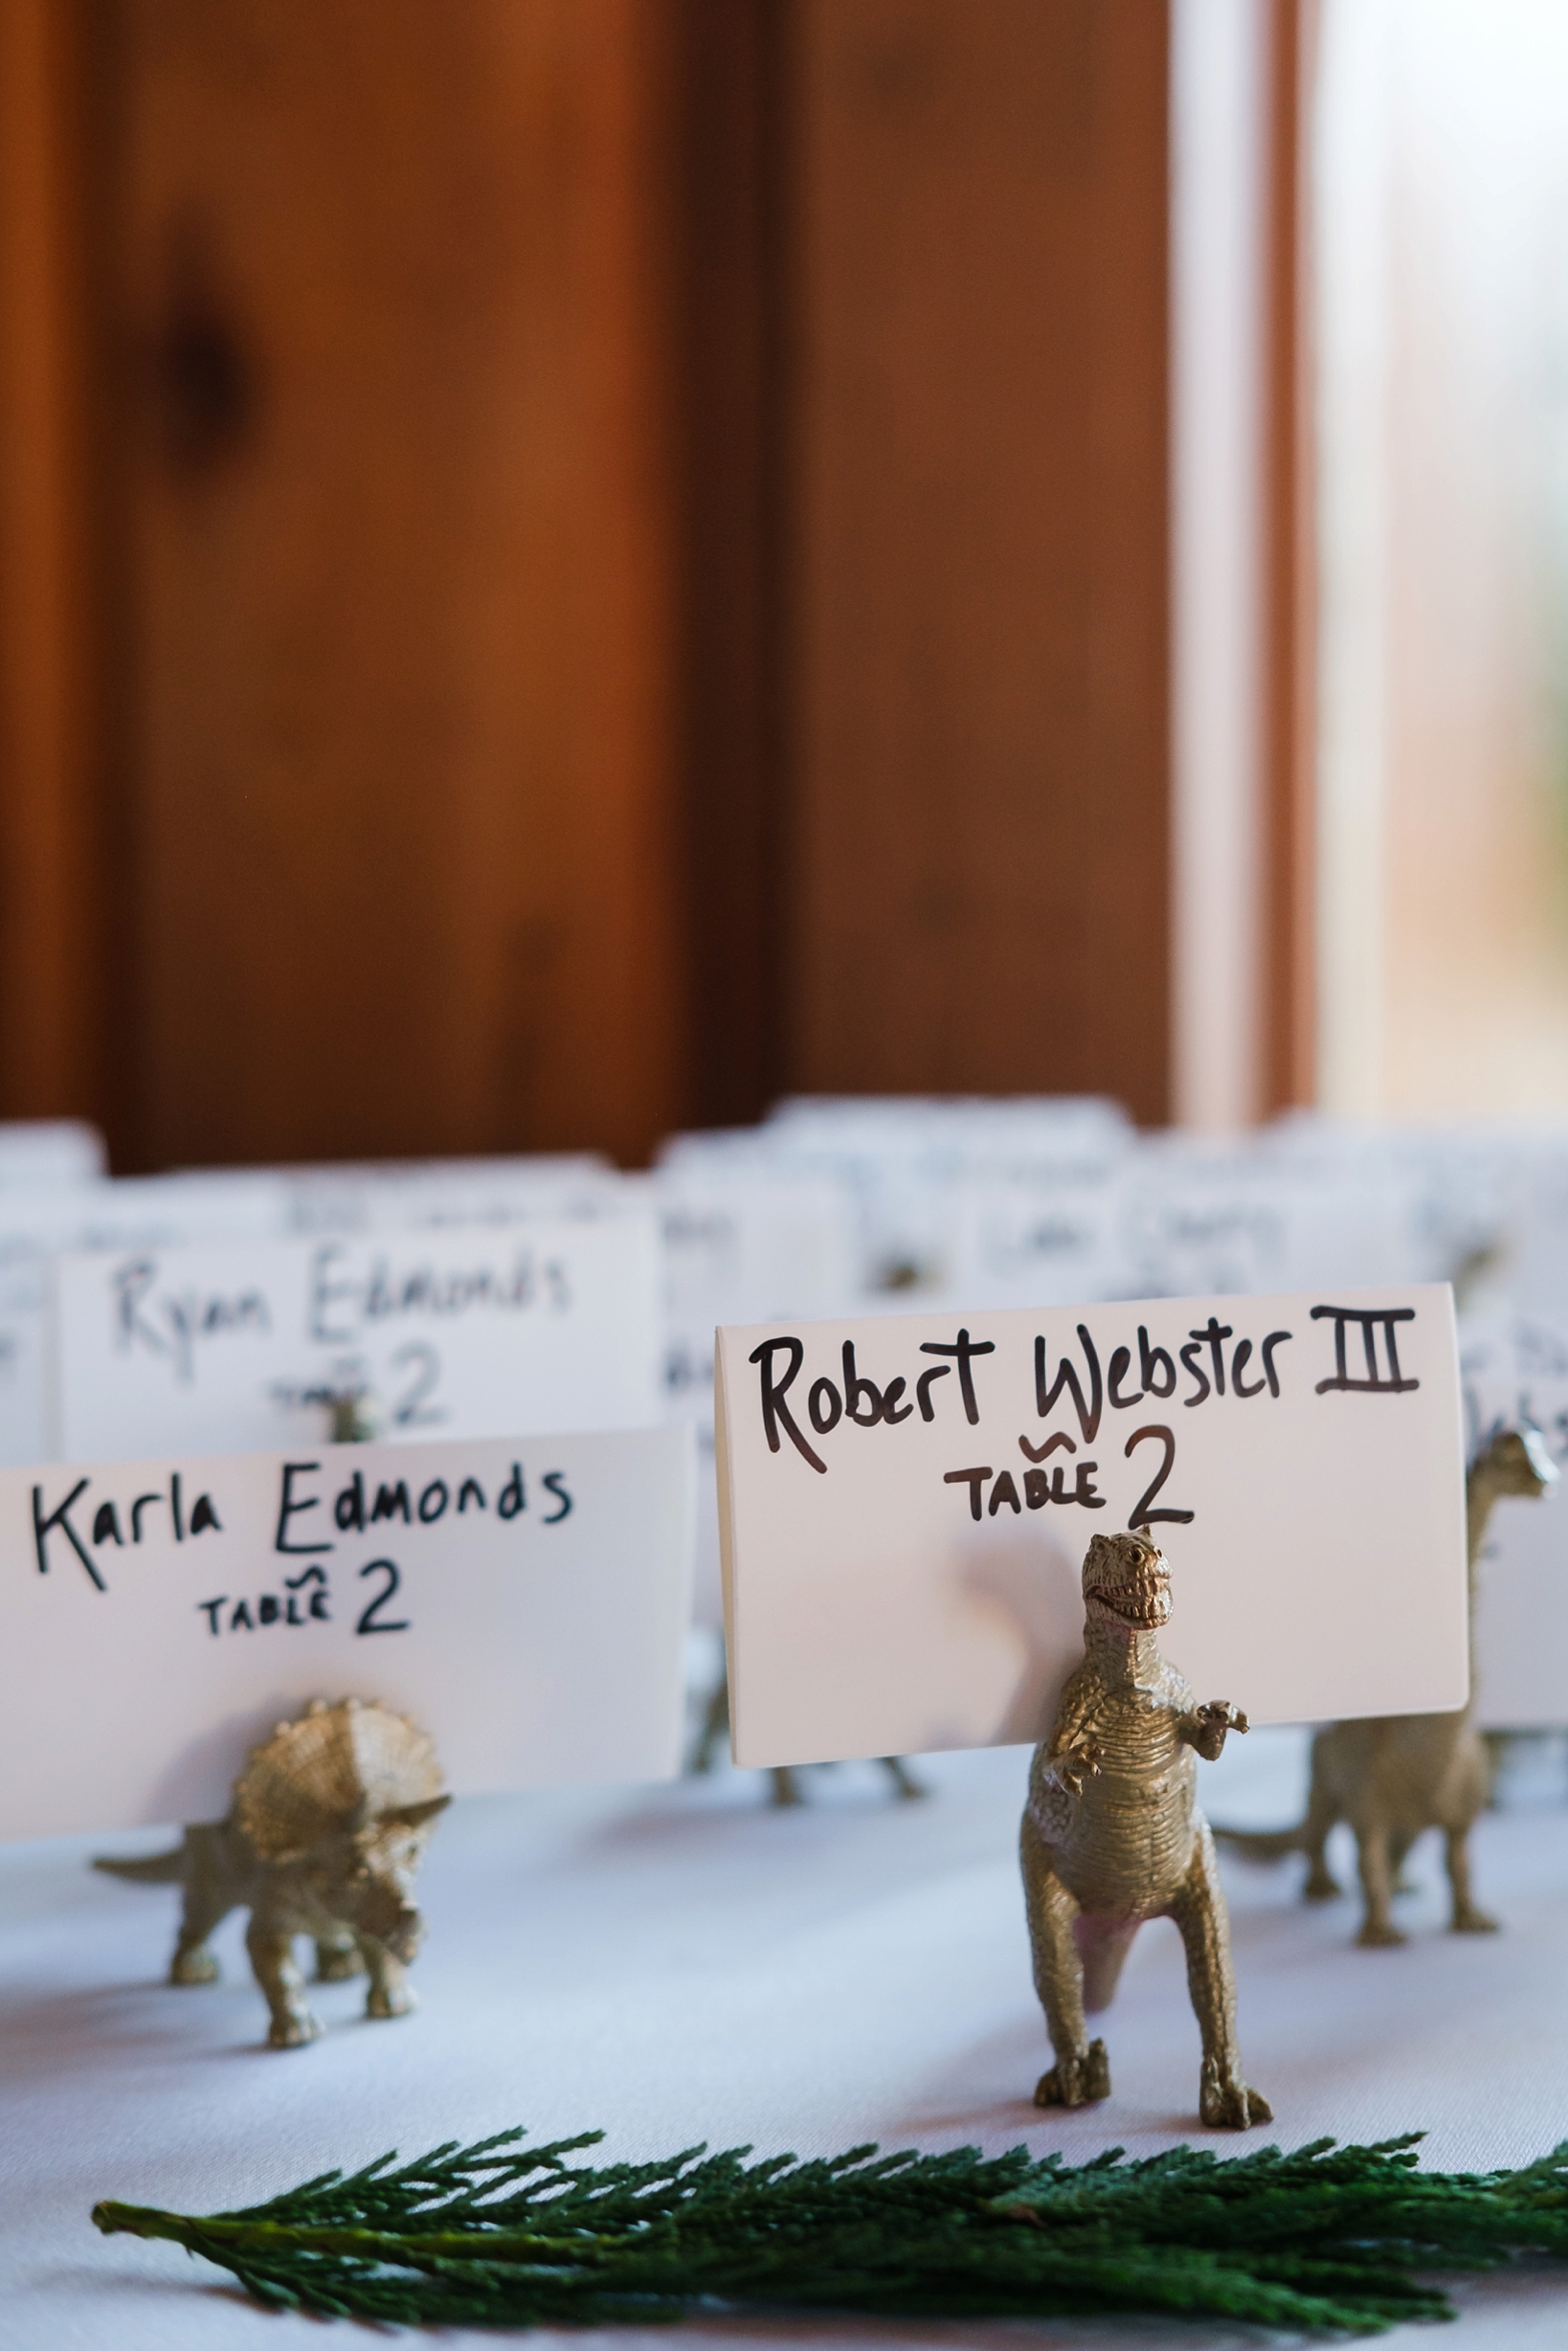 Table seating charts are decorated with hand-painted dinosaur figurines